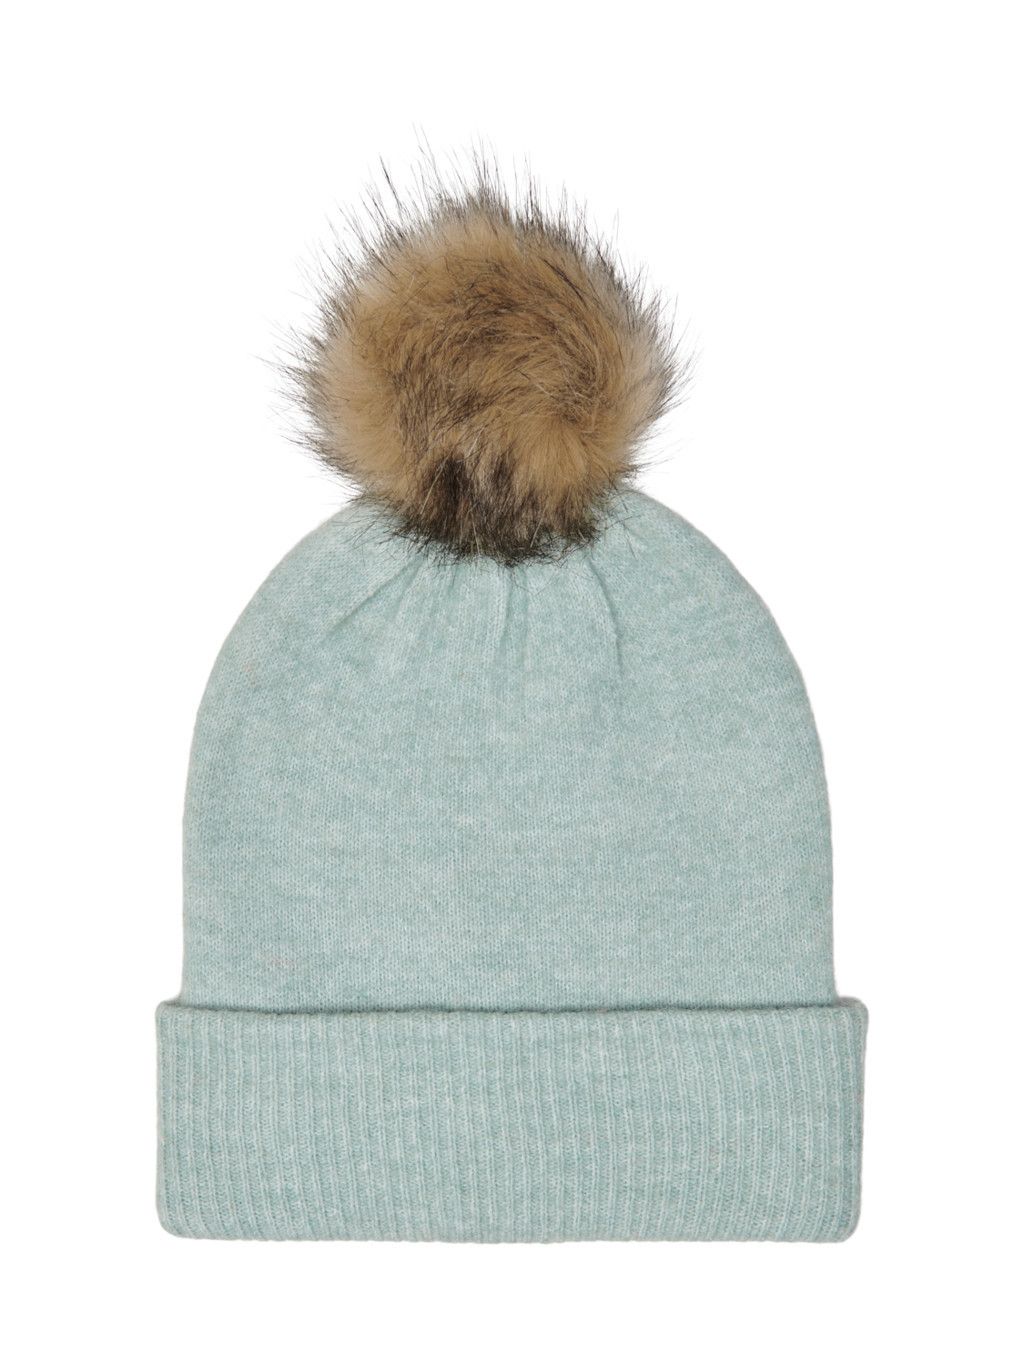 Brand: Only Gender: Women Type: Caps Season: Fall/Winter  PRODUCT DETAIL • Color: light blue • Pattern: plain  COMPOSITION AND MATERIAL • Composition: -36% acrylic -3% elastane -5% wool -56% polyester  •  Washing: handwash